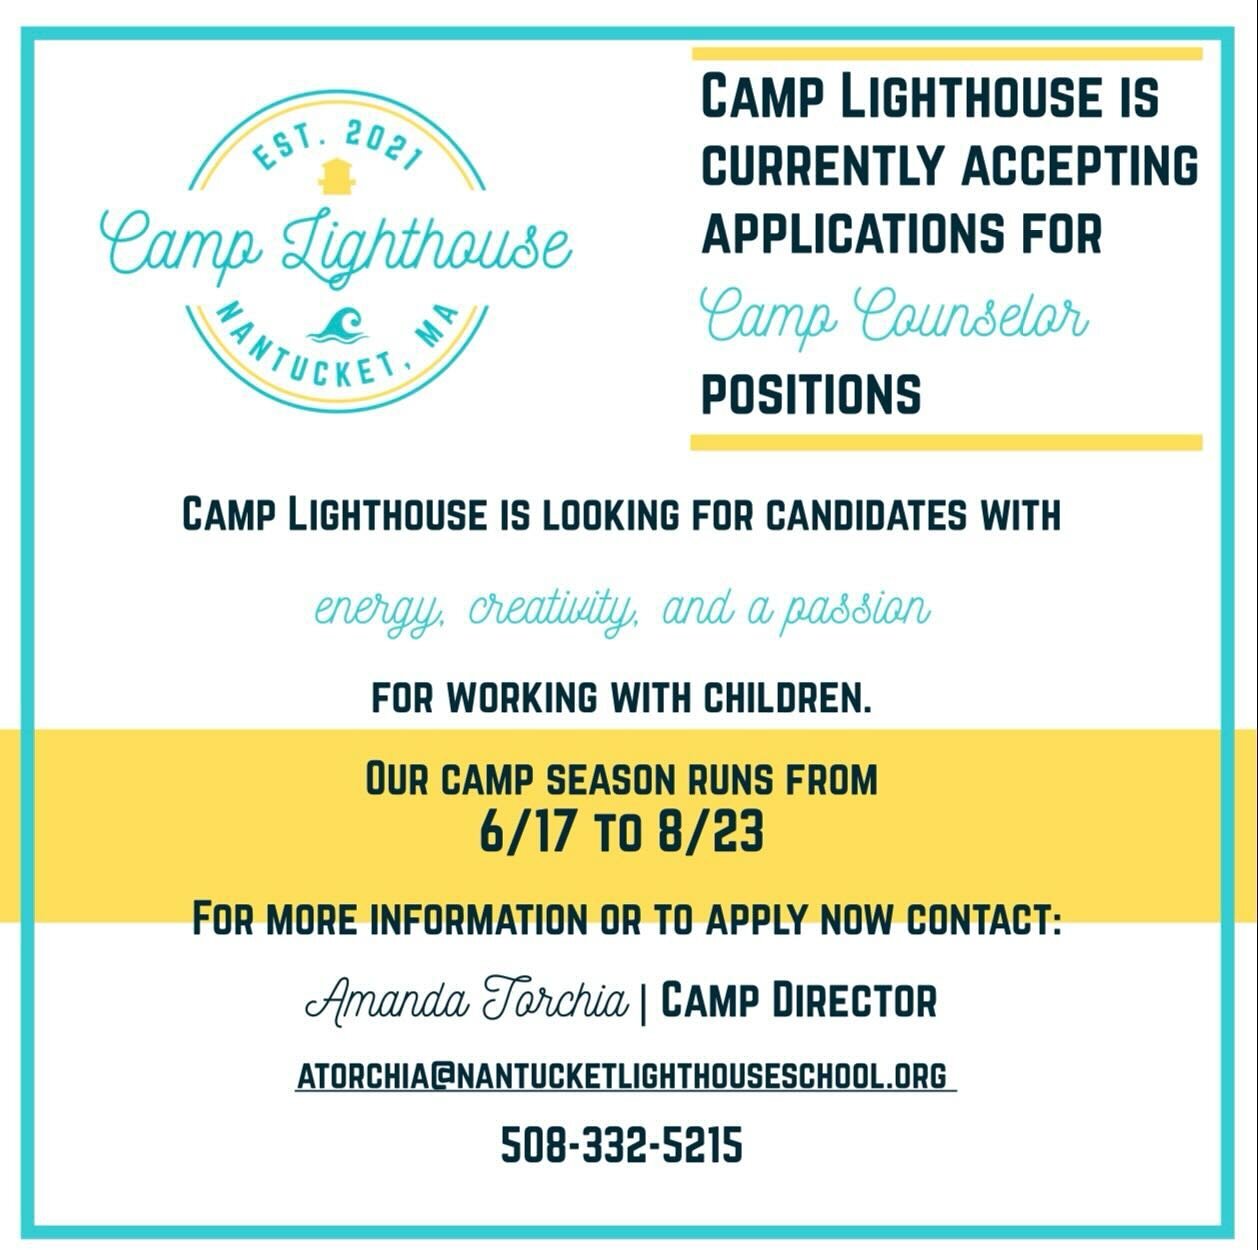 Are you energetic, creative, and have a passion for working with children? Camp Lighthouse is the place to spend your summer! ☀️

If you or someone you know over the age of 16 wants to spend their summer providing quality programming for kids and hav